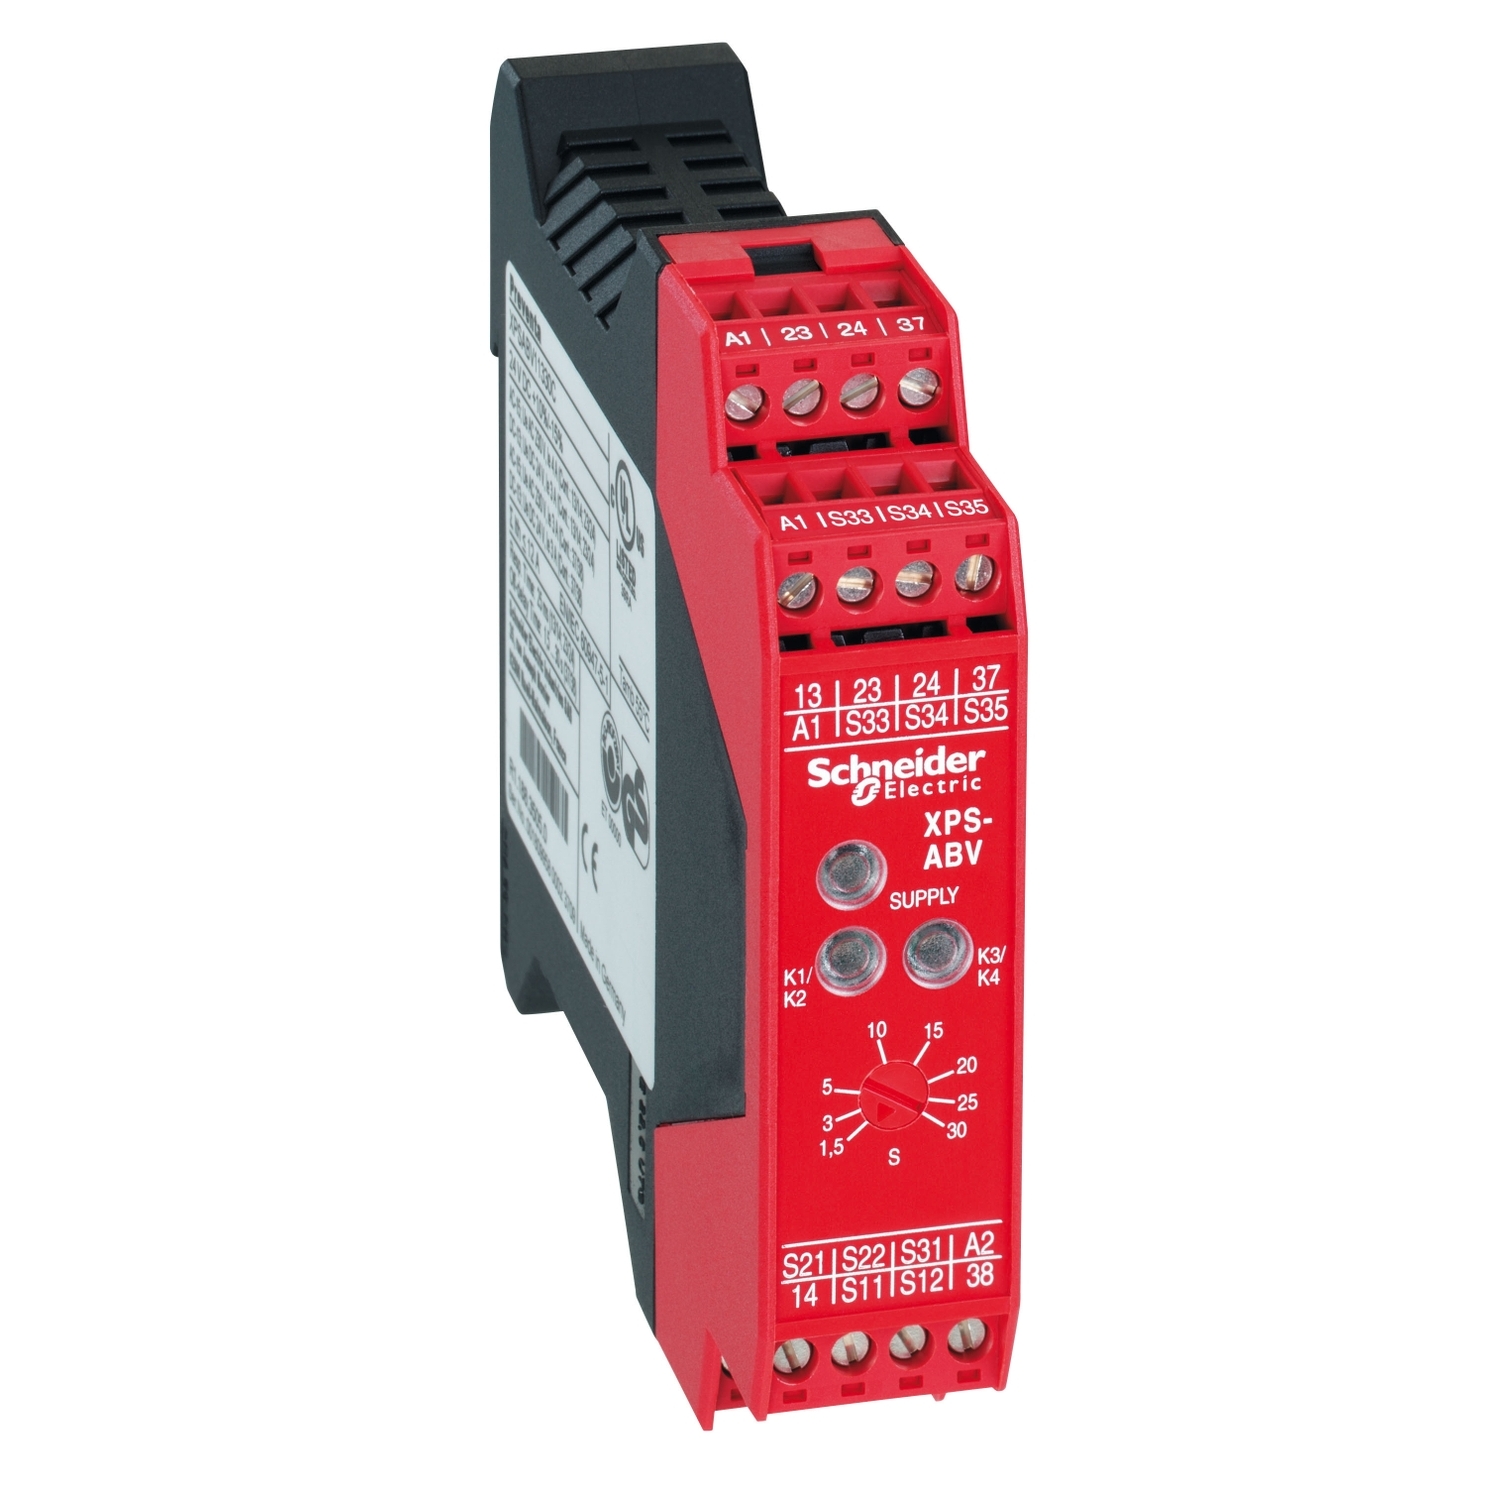 module XPSABV - stop and switch monitoring - 24 V AC/DC